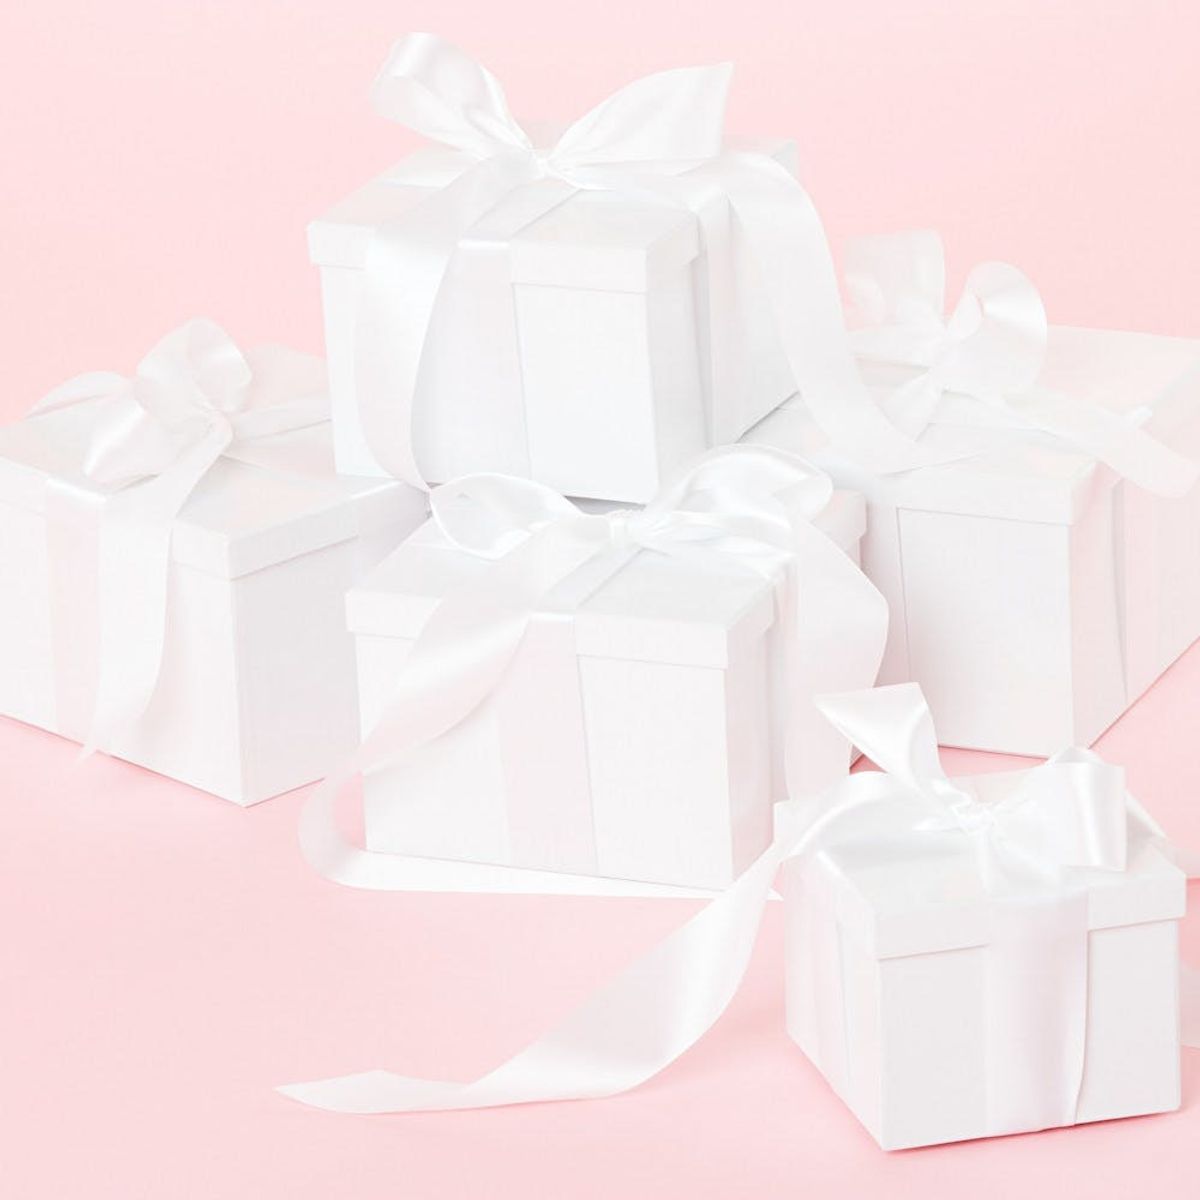 Experts Say This Is How Much Cash You Should Give As a Wedding Gift